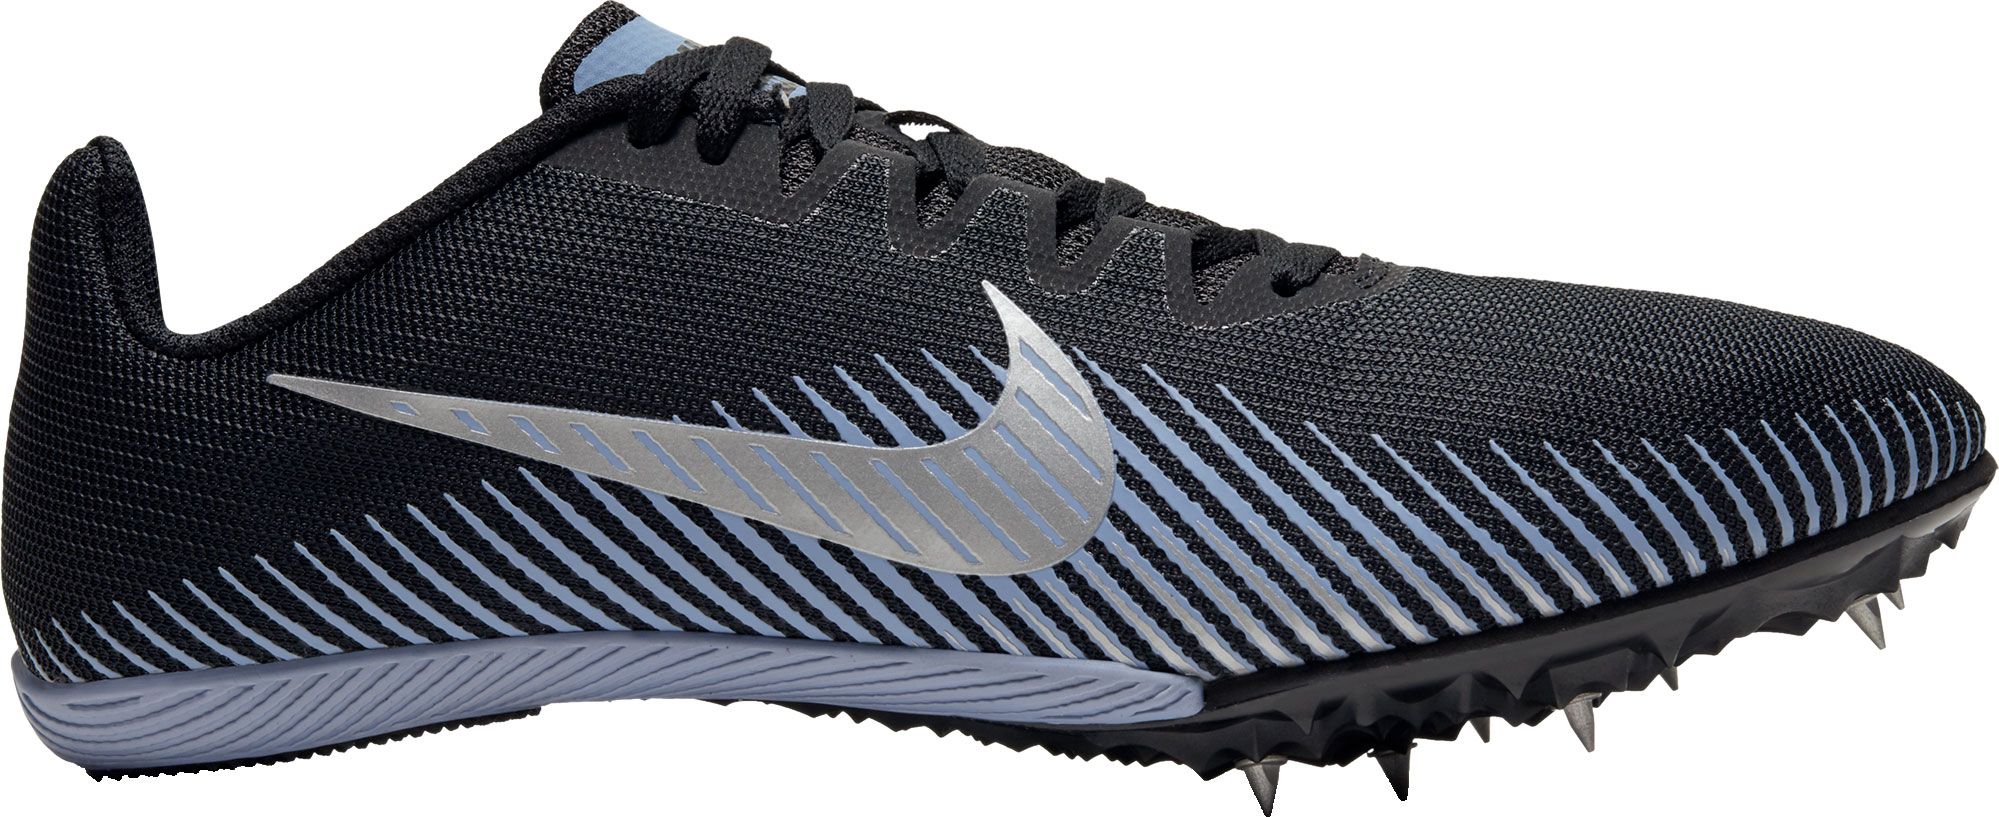 nike men's zoom rival m 9 track and field shoes